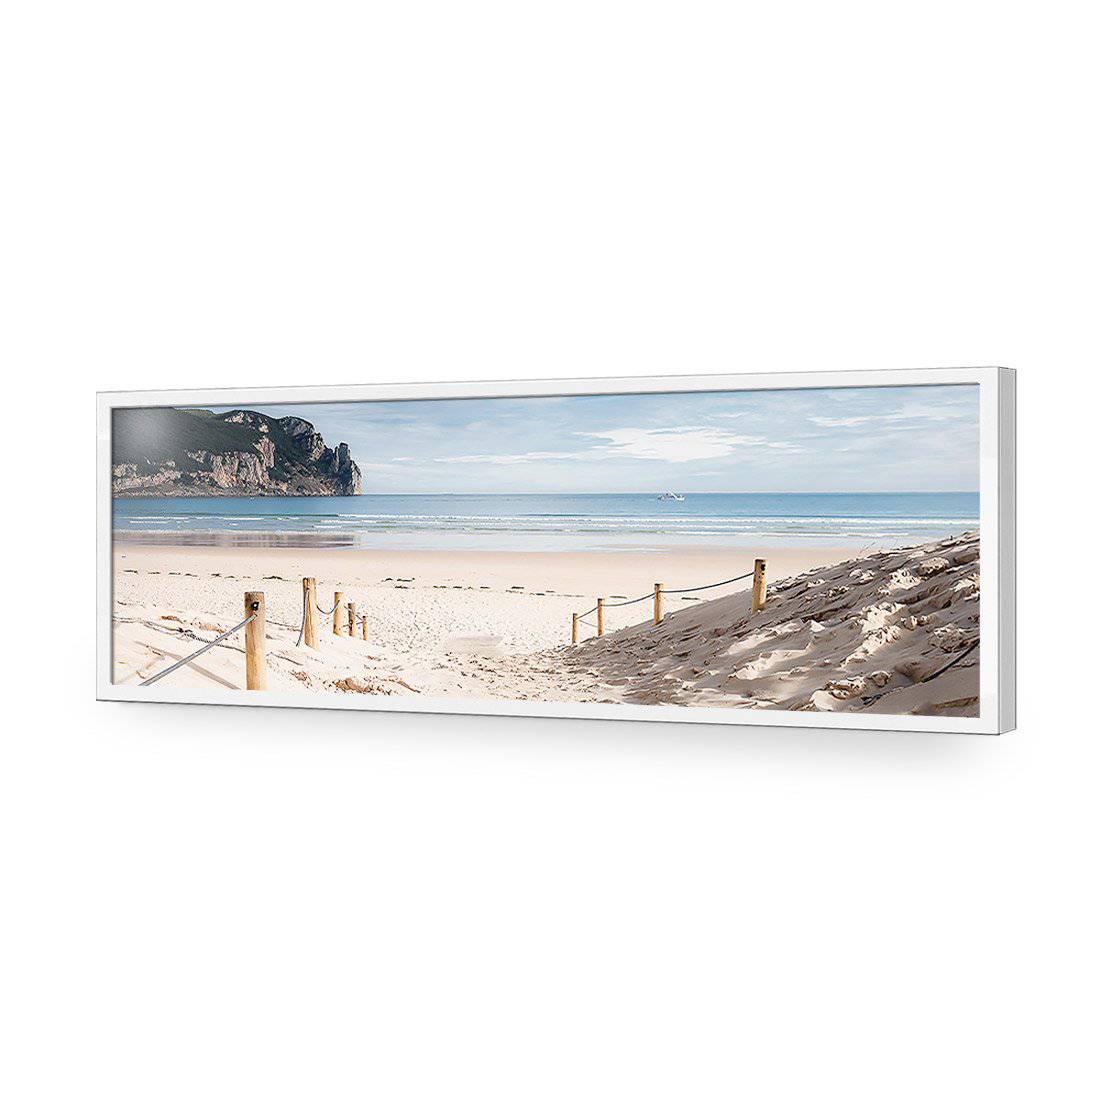 Tranquil Beach, Long-Acrylic-Wall Art Design-Without Border-Acrylic - White Frame-60x20cm-Wall Art Designs